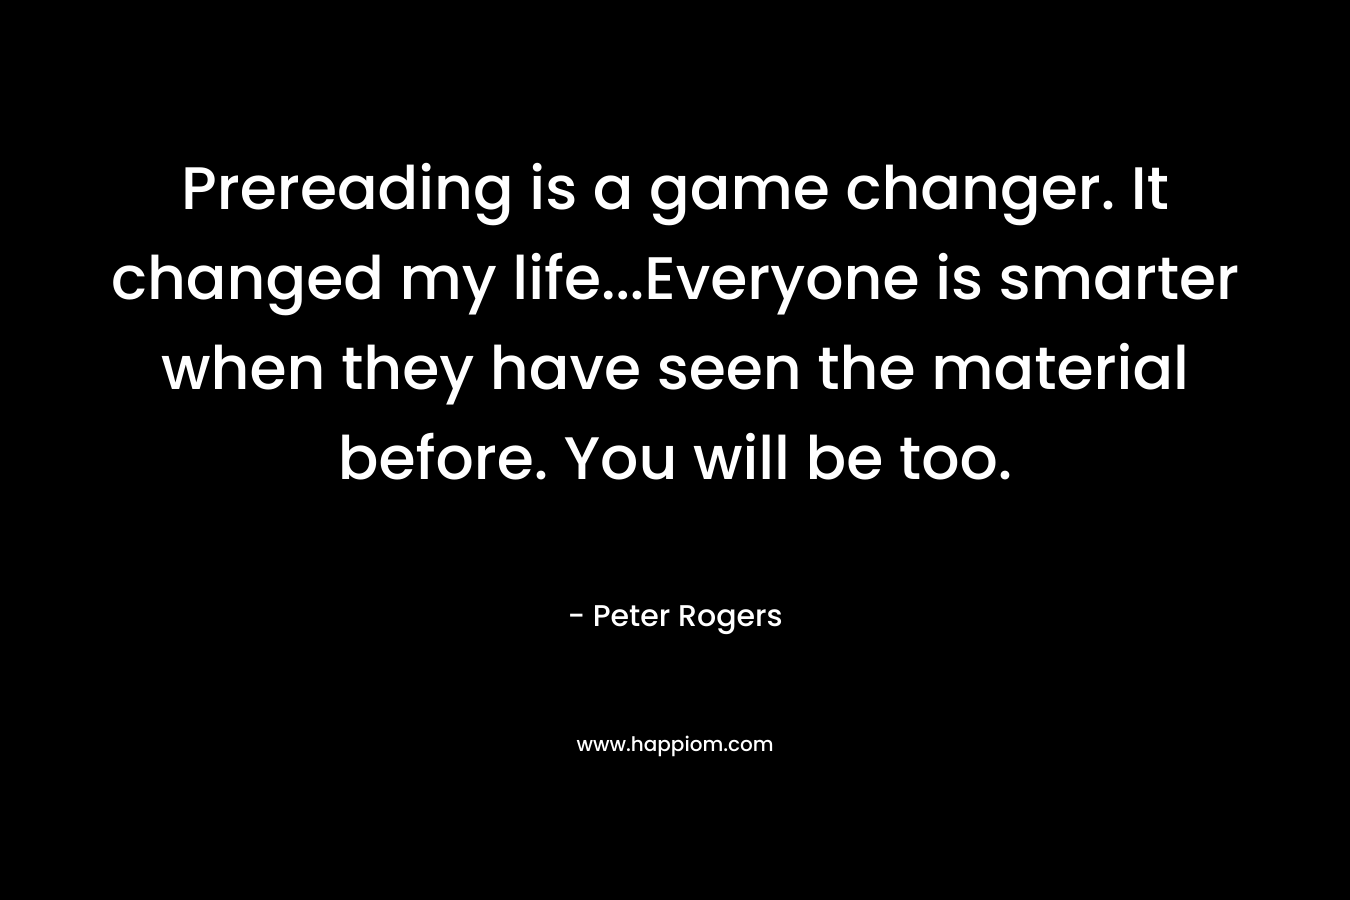 Prereading is a game changer. It changed my life...Everyone is smarter when they have seen the material before. You will be too.